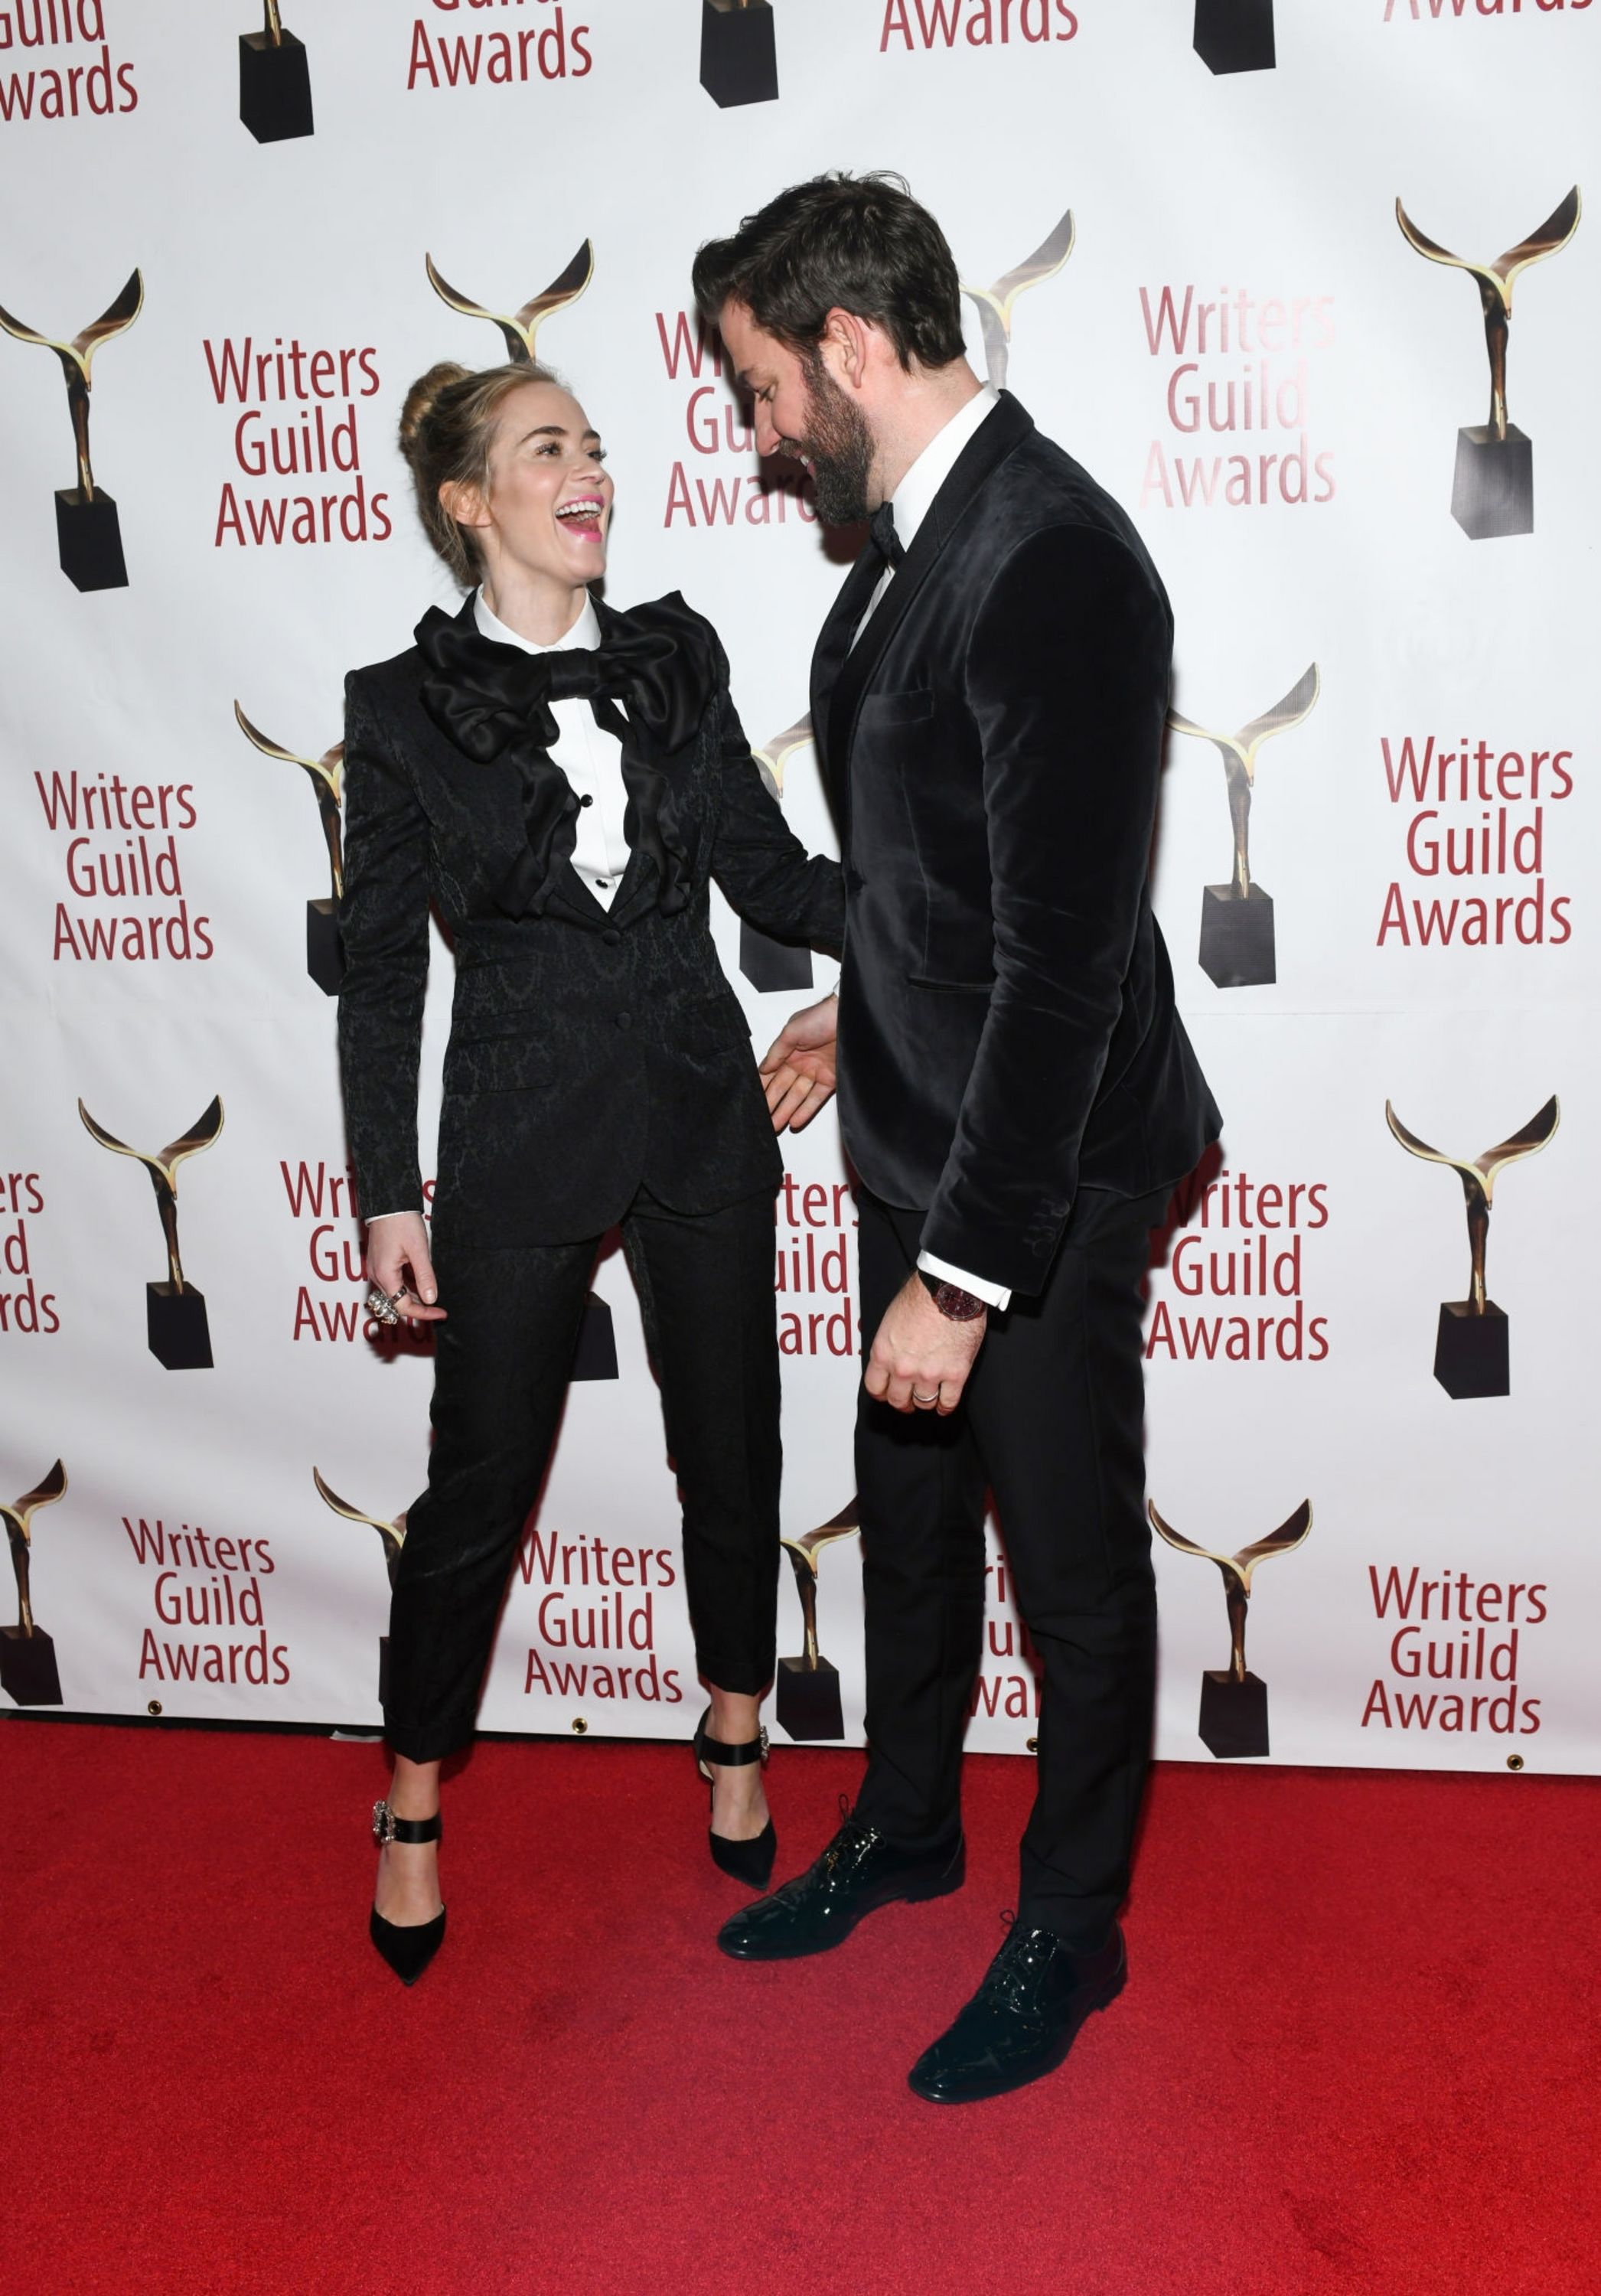 2019-02-17-71st-Annual-Writers-Guild-Awards-044.jpg